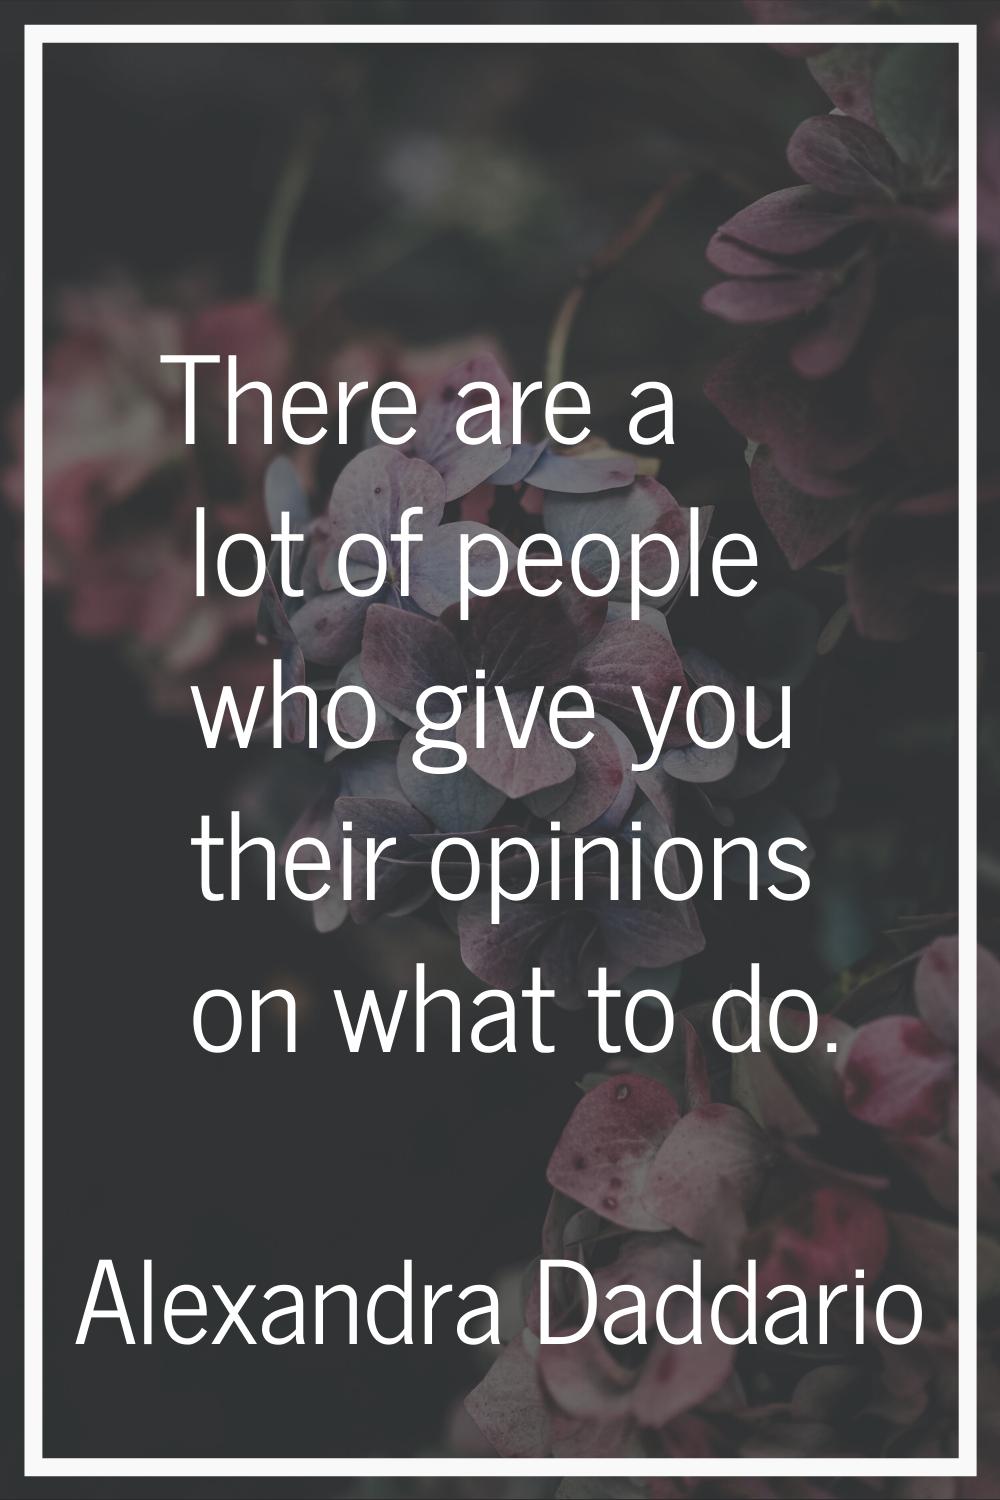 There are a lot of people who give you their opinions on what to do.